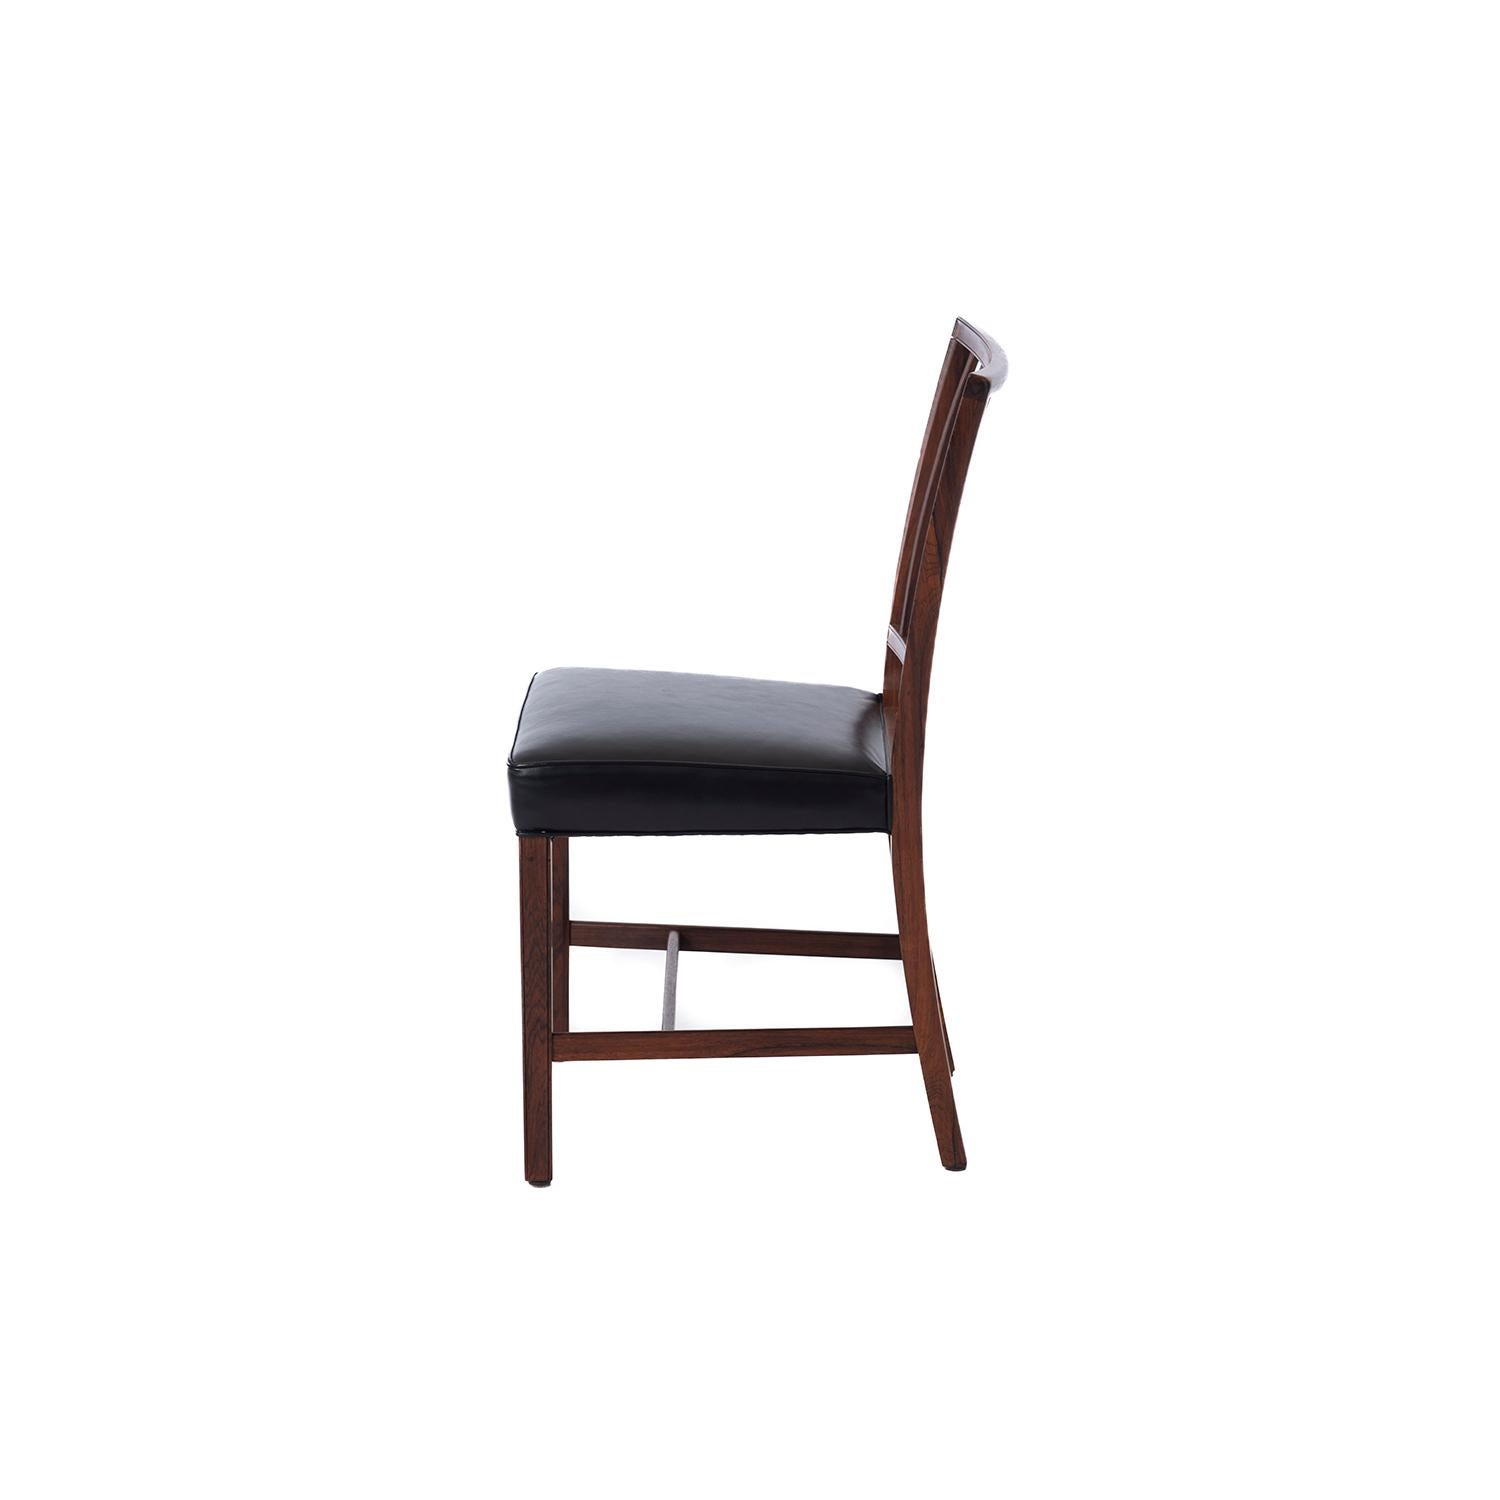 Jacob Kjaer Grand Prix Paris Dining Chairs In Excellent Condition For Sale In Minneapolis, MN